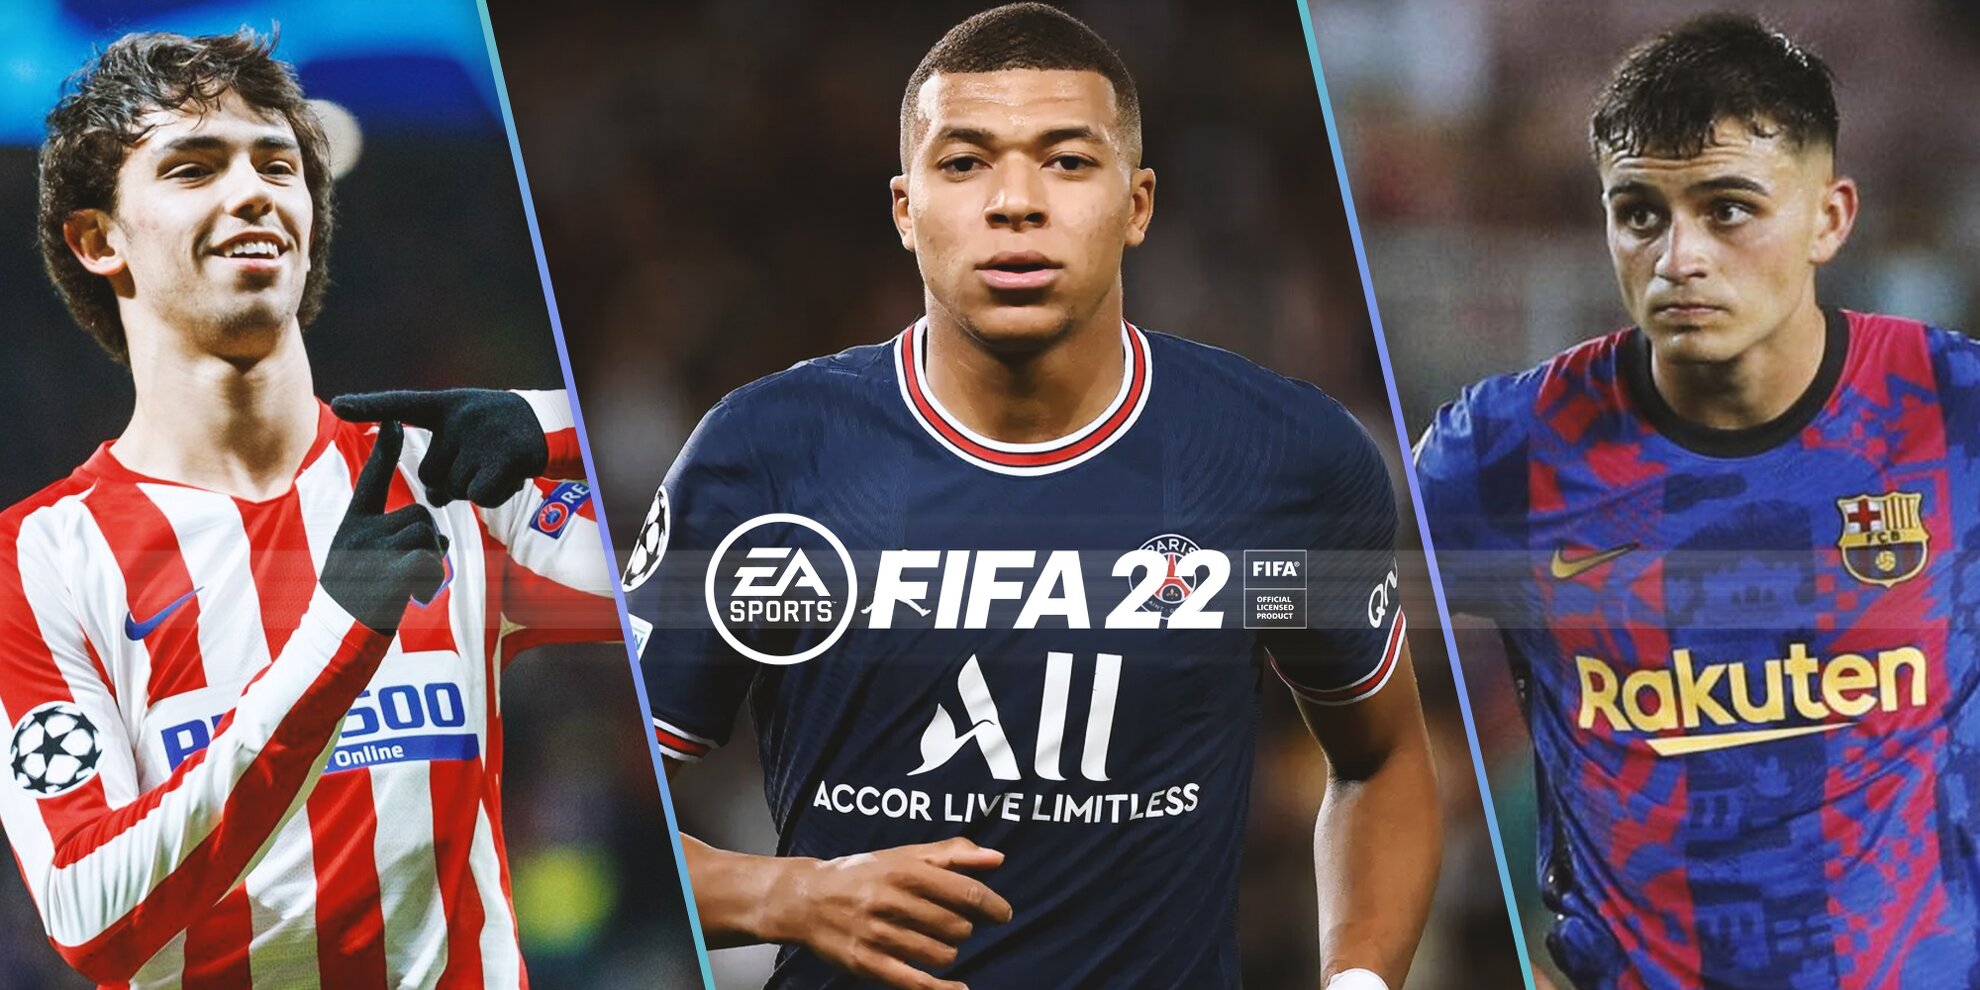 Top 10 players with highest potential rating in FIFA 22